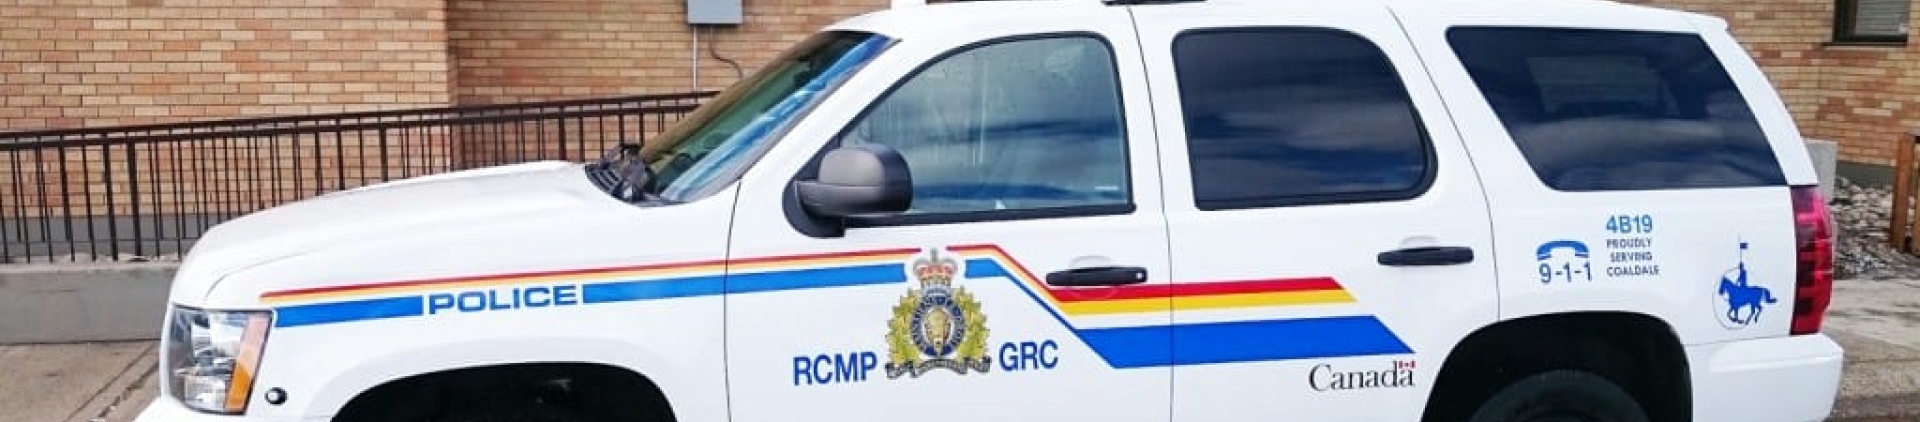 RCMP vehicle a Town Office